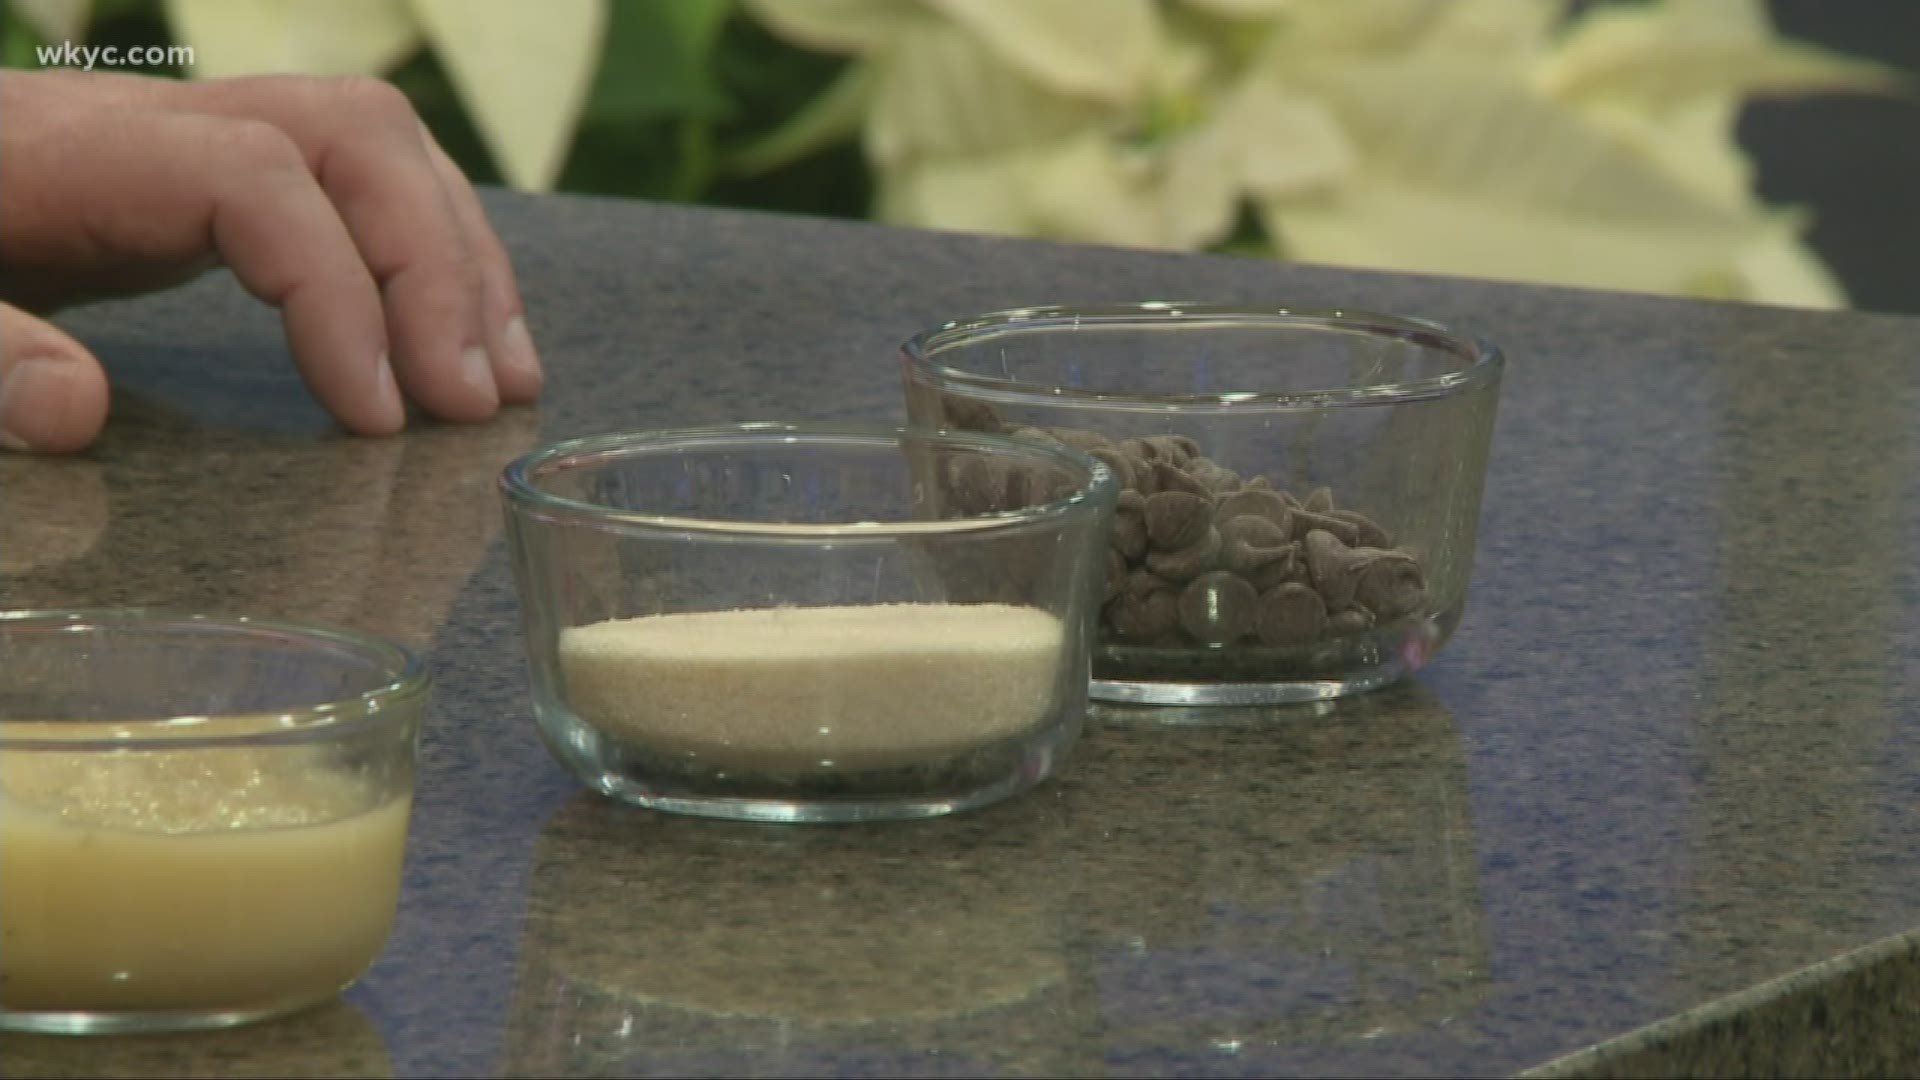 Registered Dietitian Julia Zumpano from The Cleveland Clinic shares how to make healthier cookies.